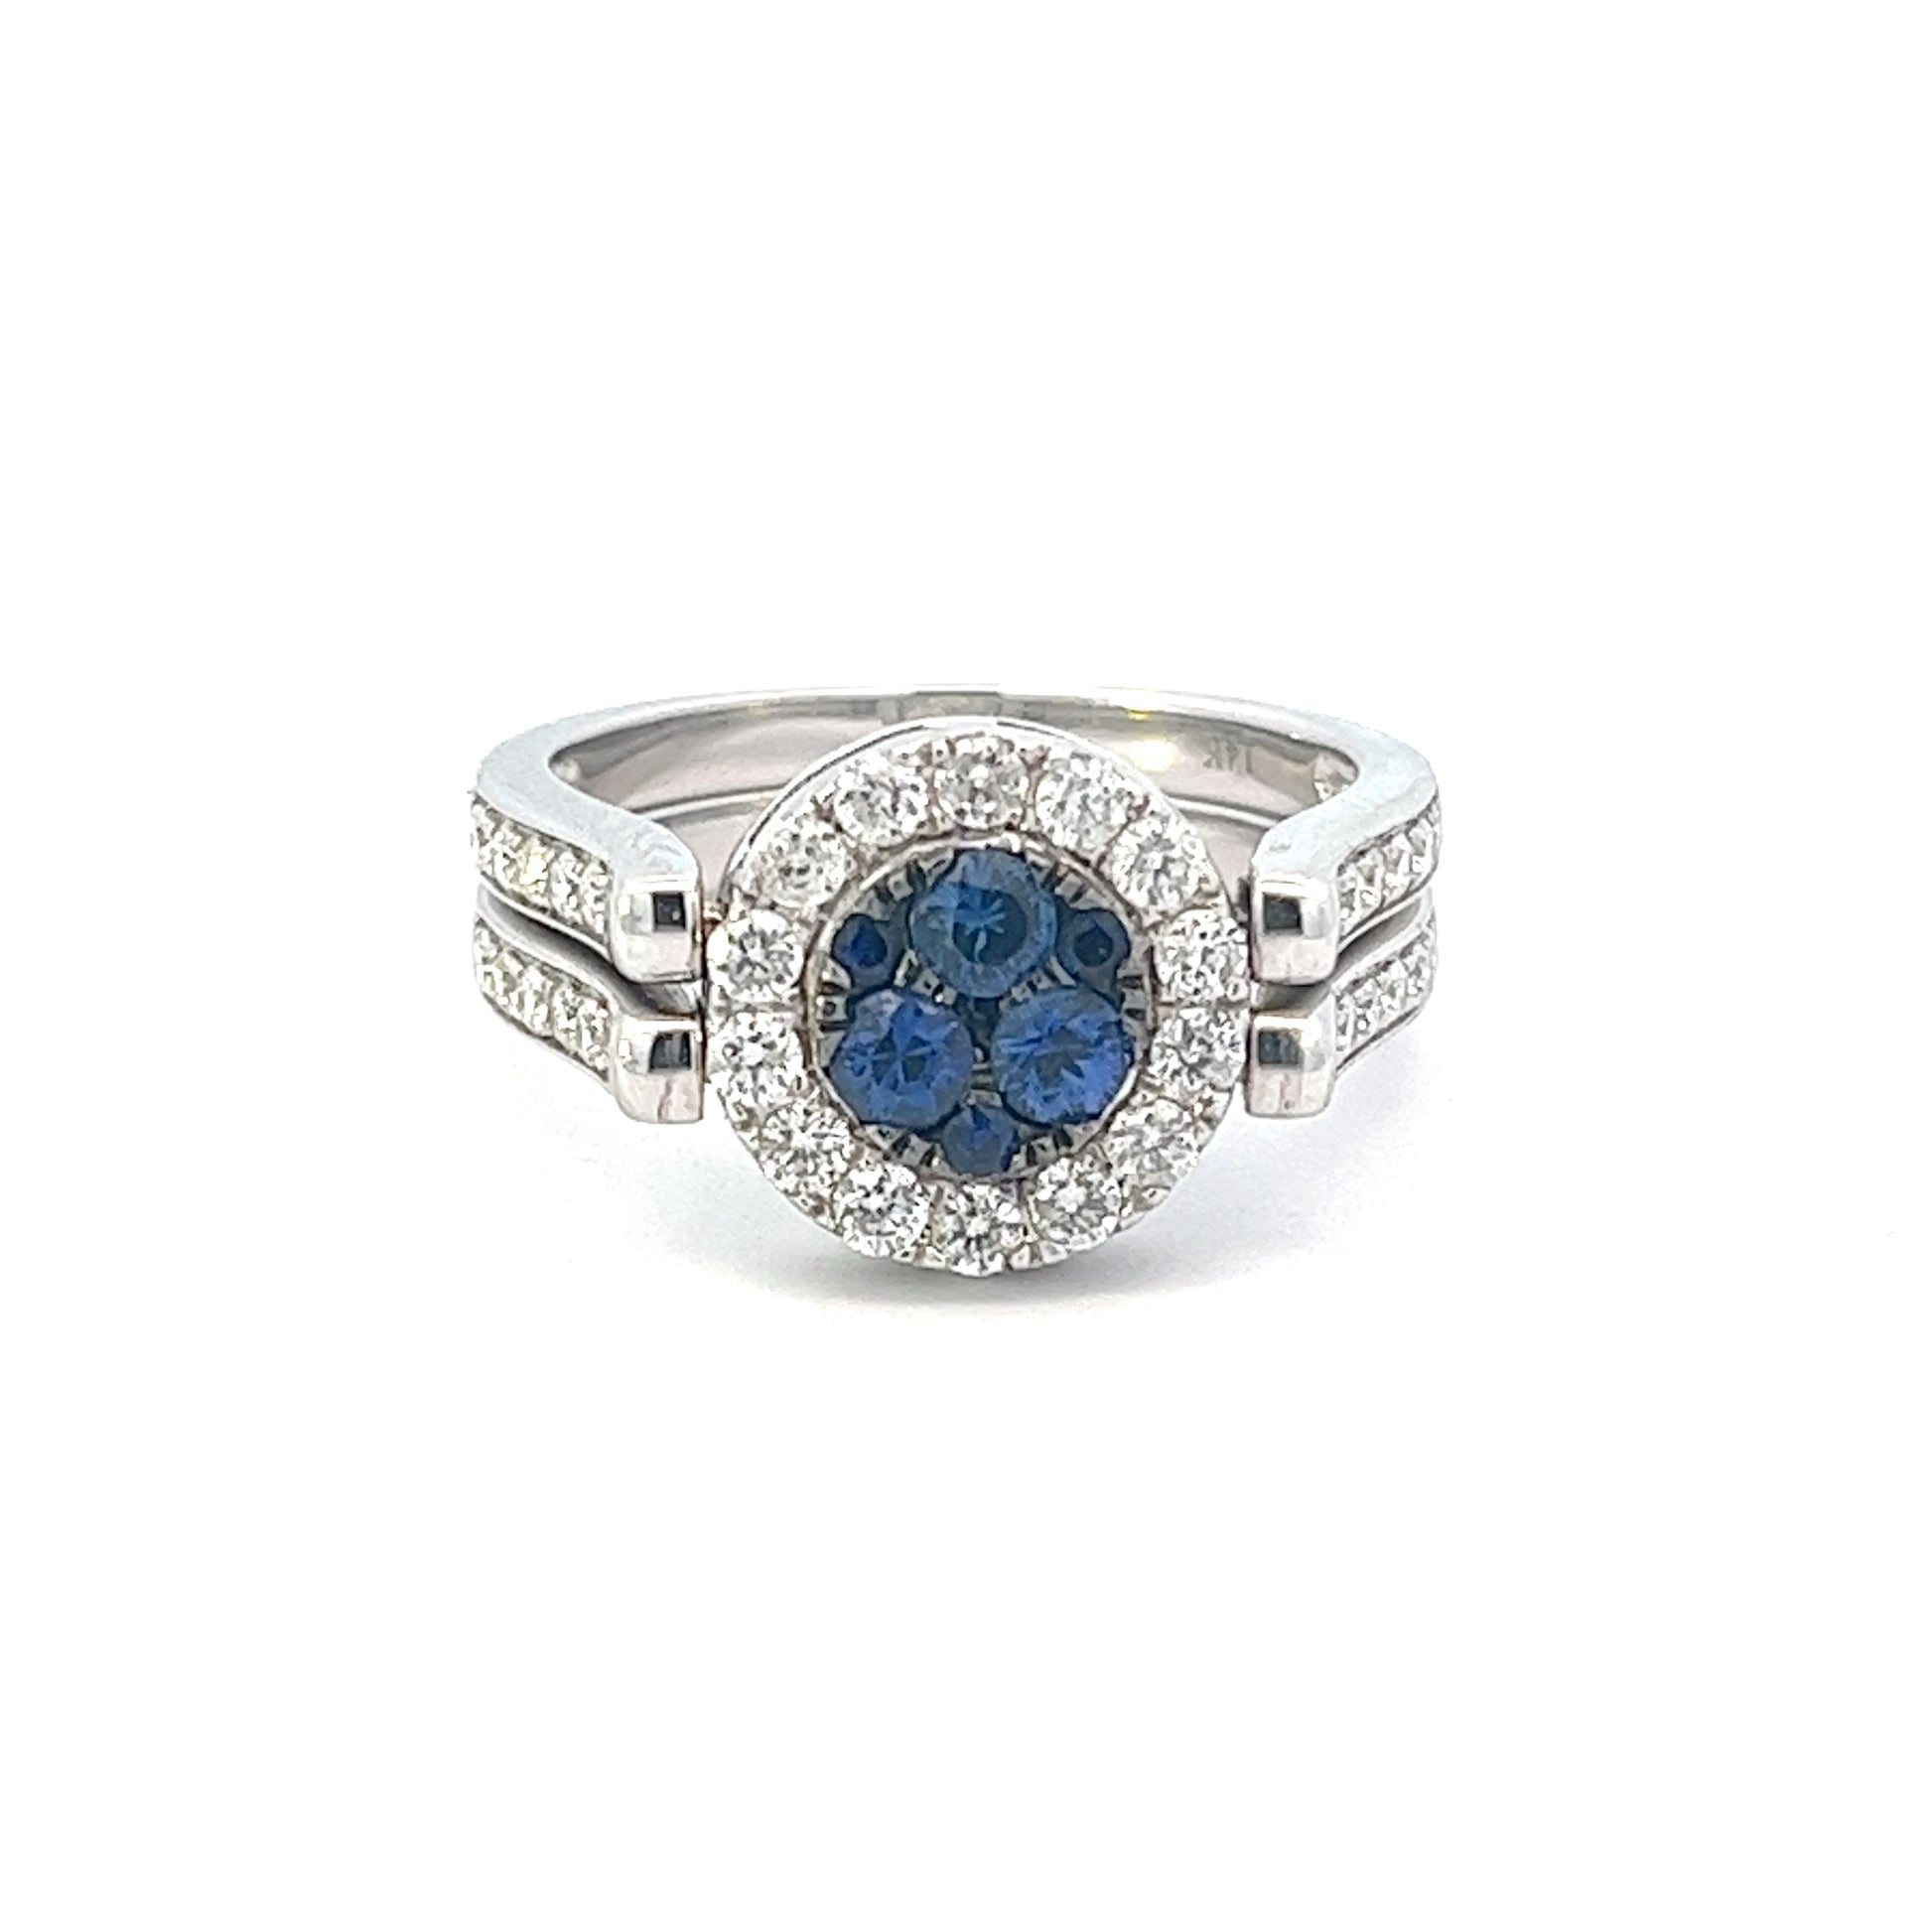 Reversible Sapphire and Diamond Cluster Ring .43ct Round Brilliant Cut Diamonds & .38ct Round Sapphires